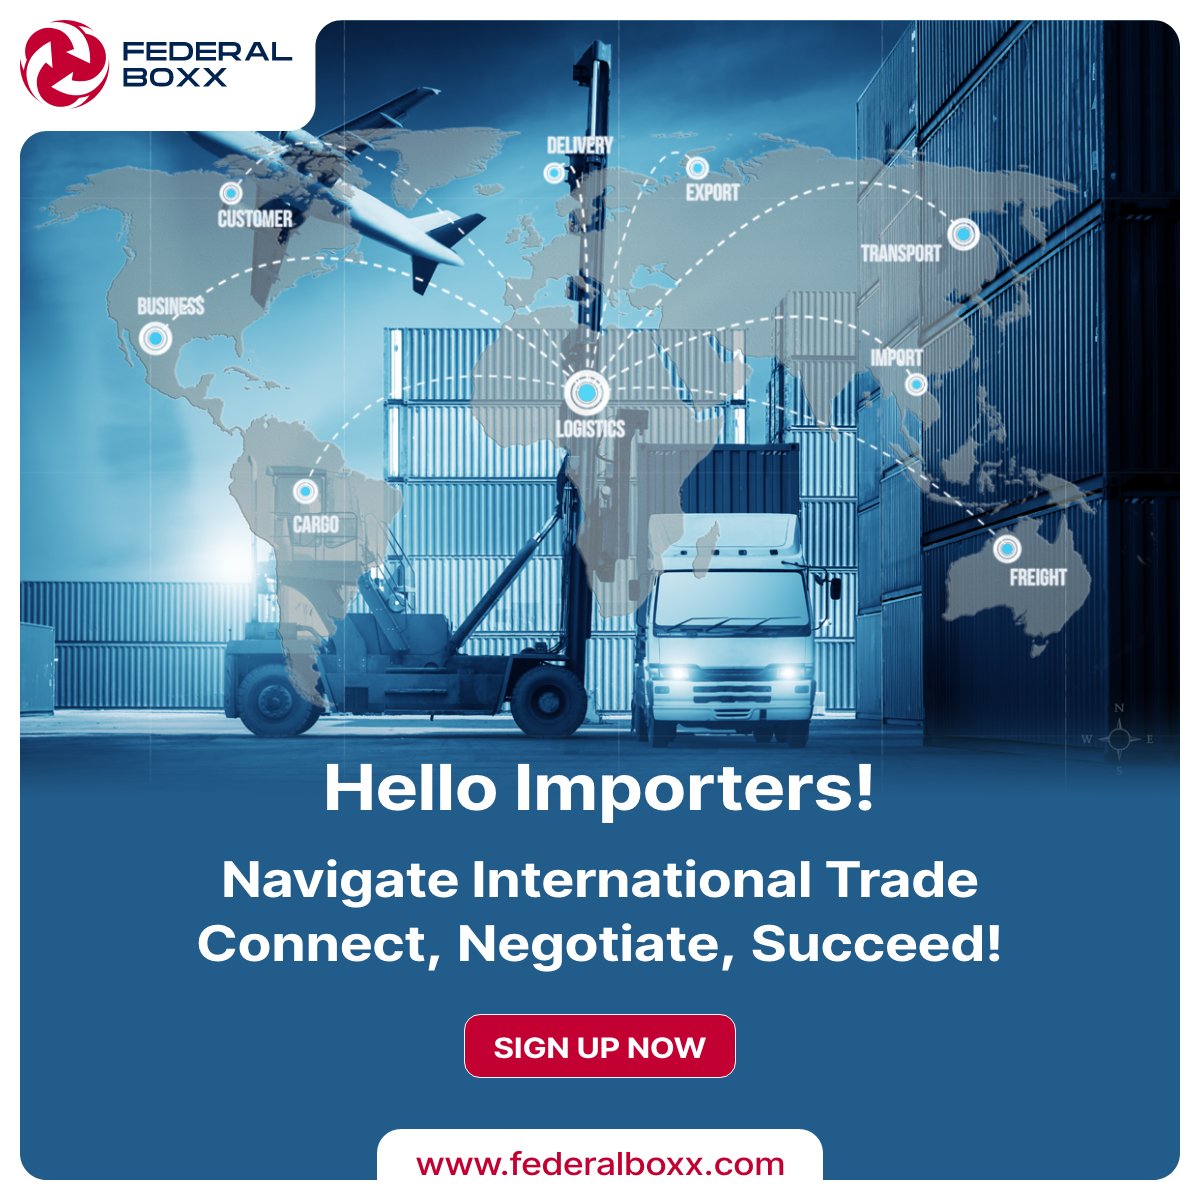 Hey Importers! Ready to navigate international trade like a pro? Connect, negotiate, and succeed with FederalBoxx! Sign up now to streamline your import process. #Importers #InternationalTrade #NegotiationSkills #BusinessSuccess